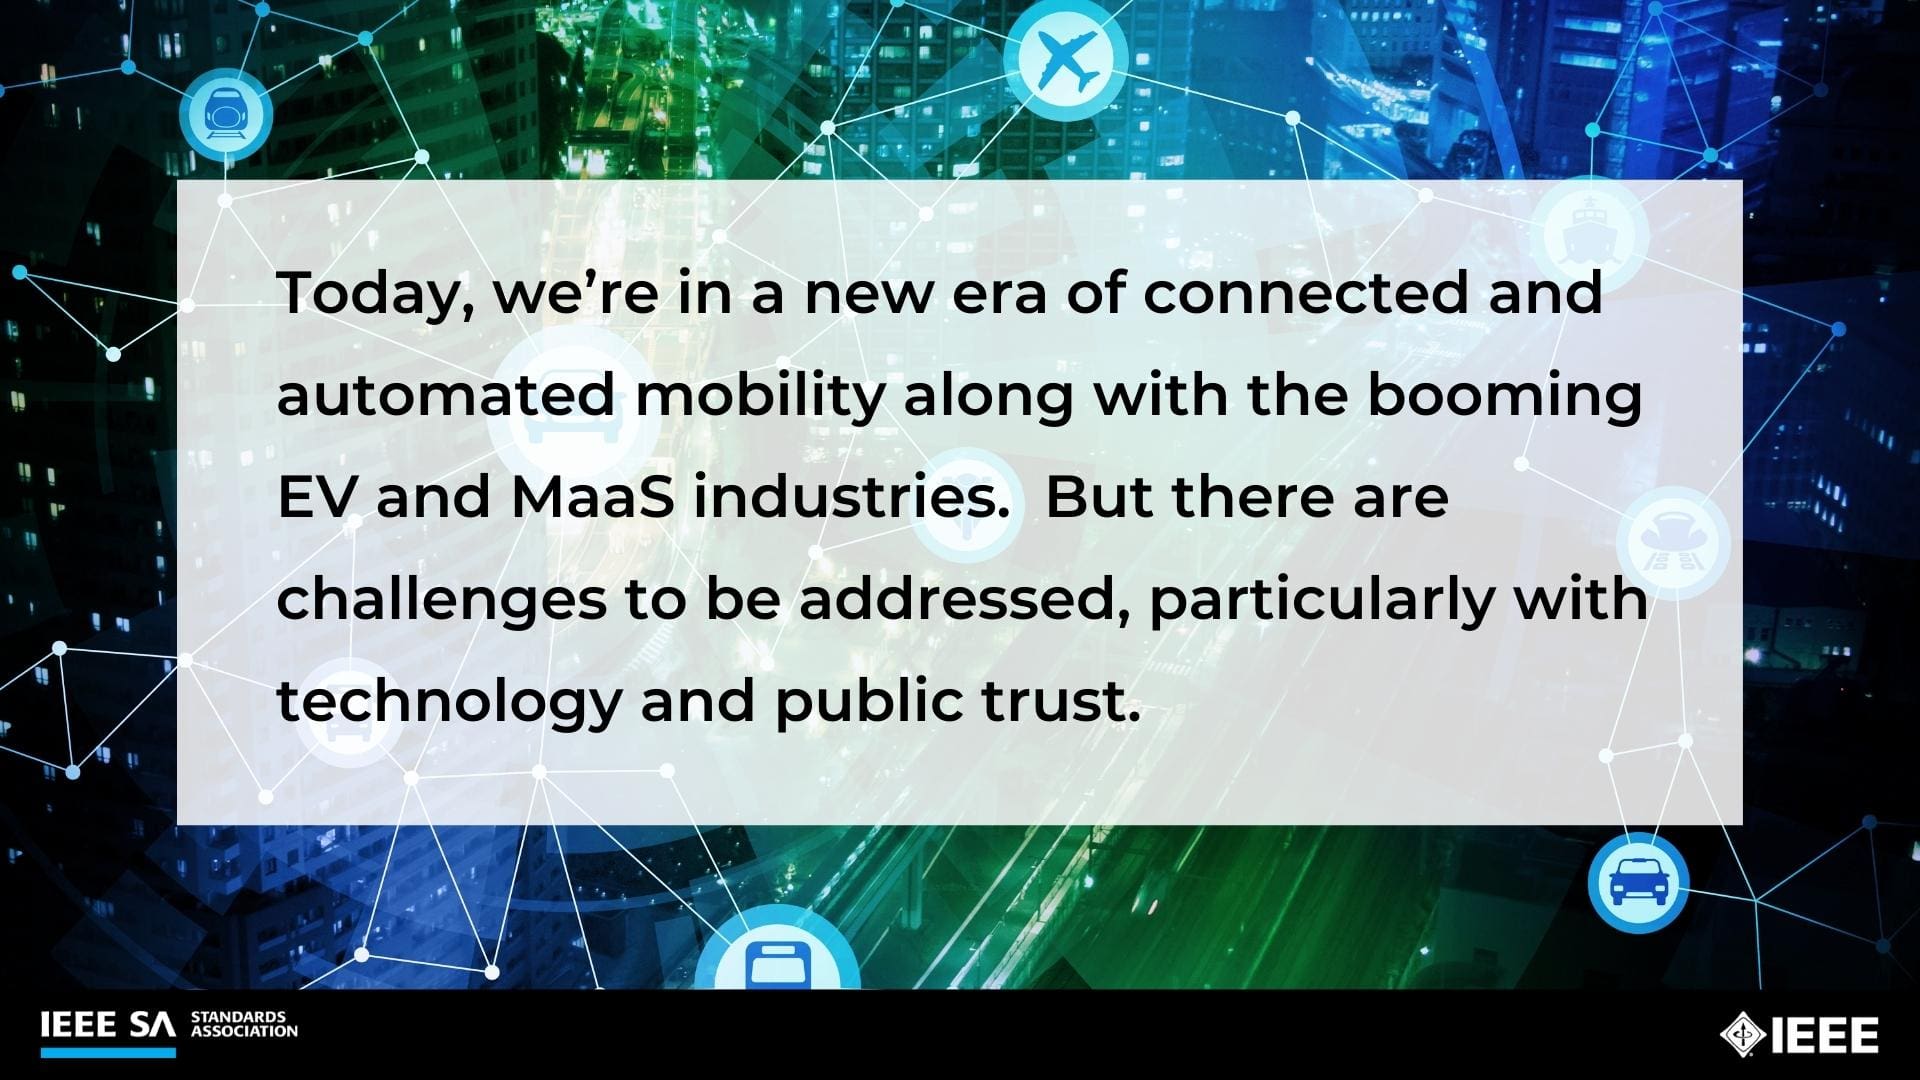 Today, we're in a new era of connected and automated mobility along with the booming EV and MaaS industries. But there are challenges to be addressed, particularly with technology and public trust.